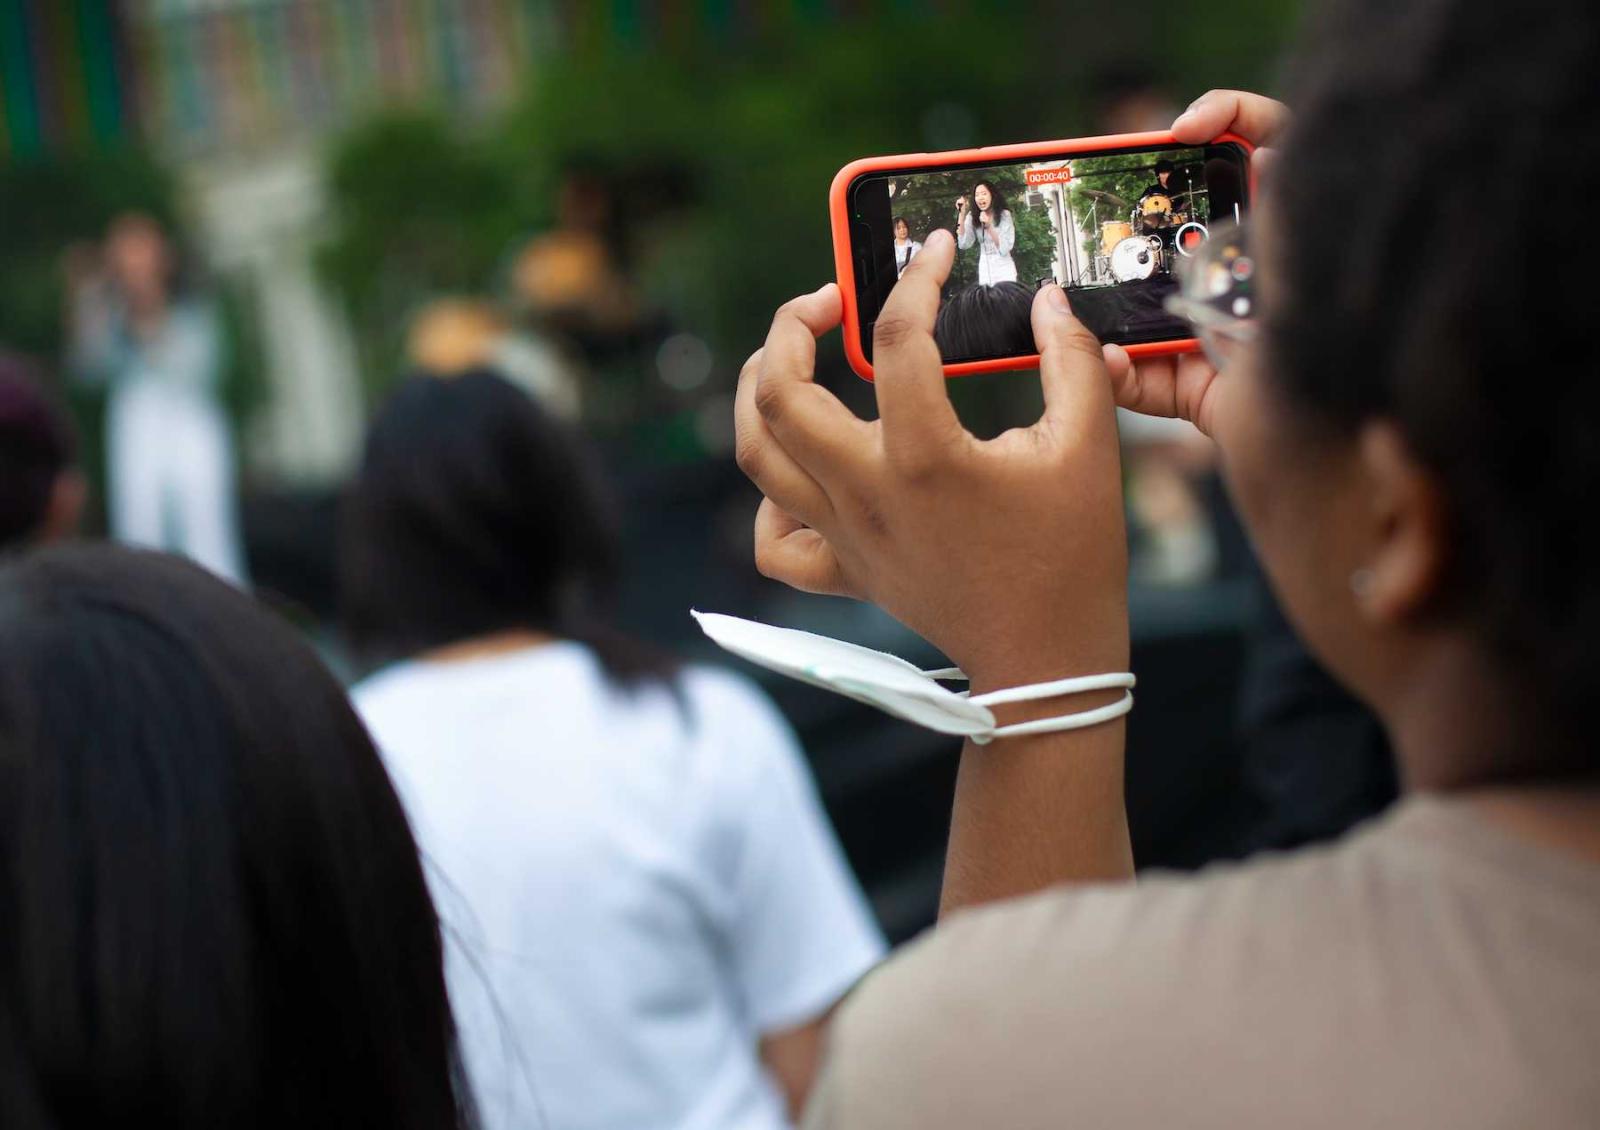 A student captures an image on a cell phone during an LUaroo performance.